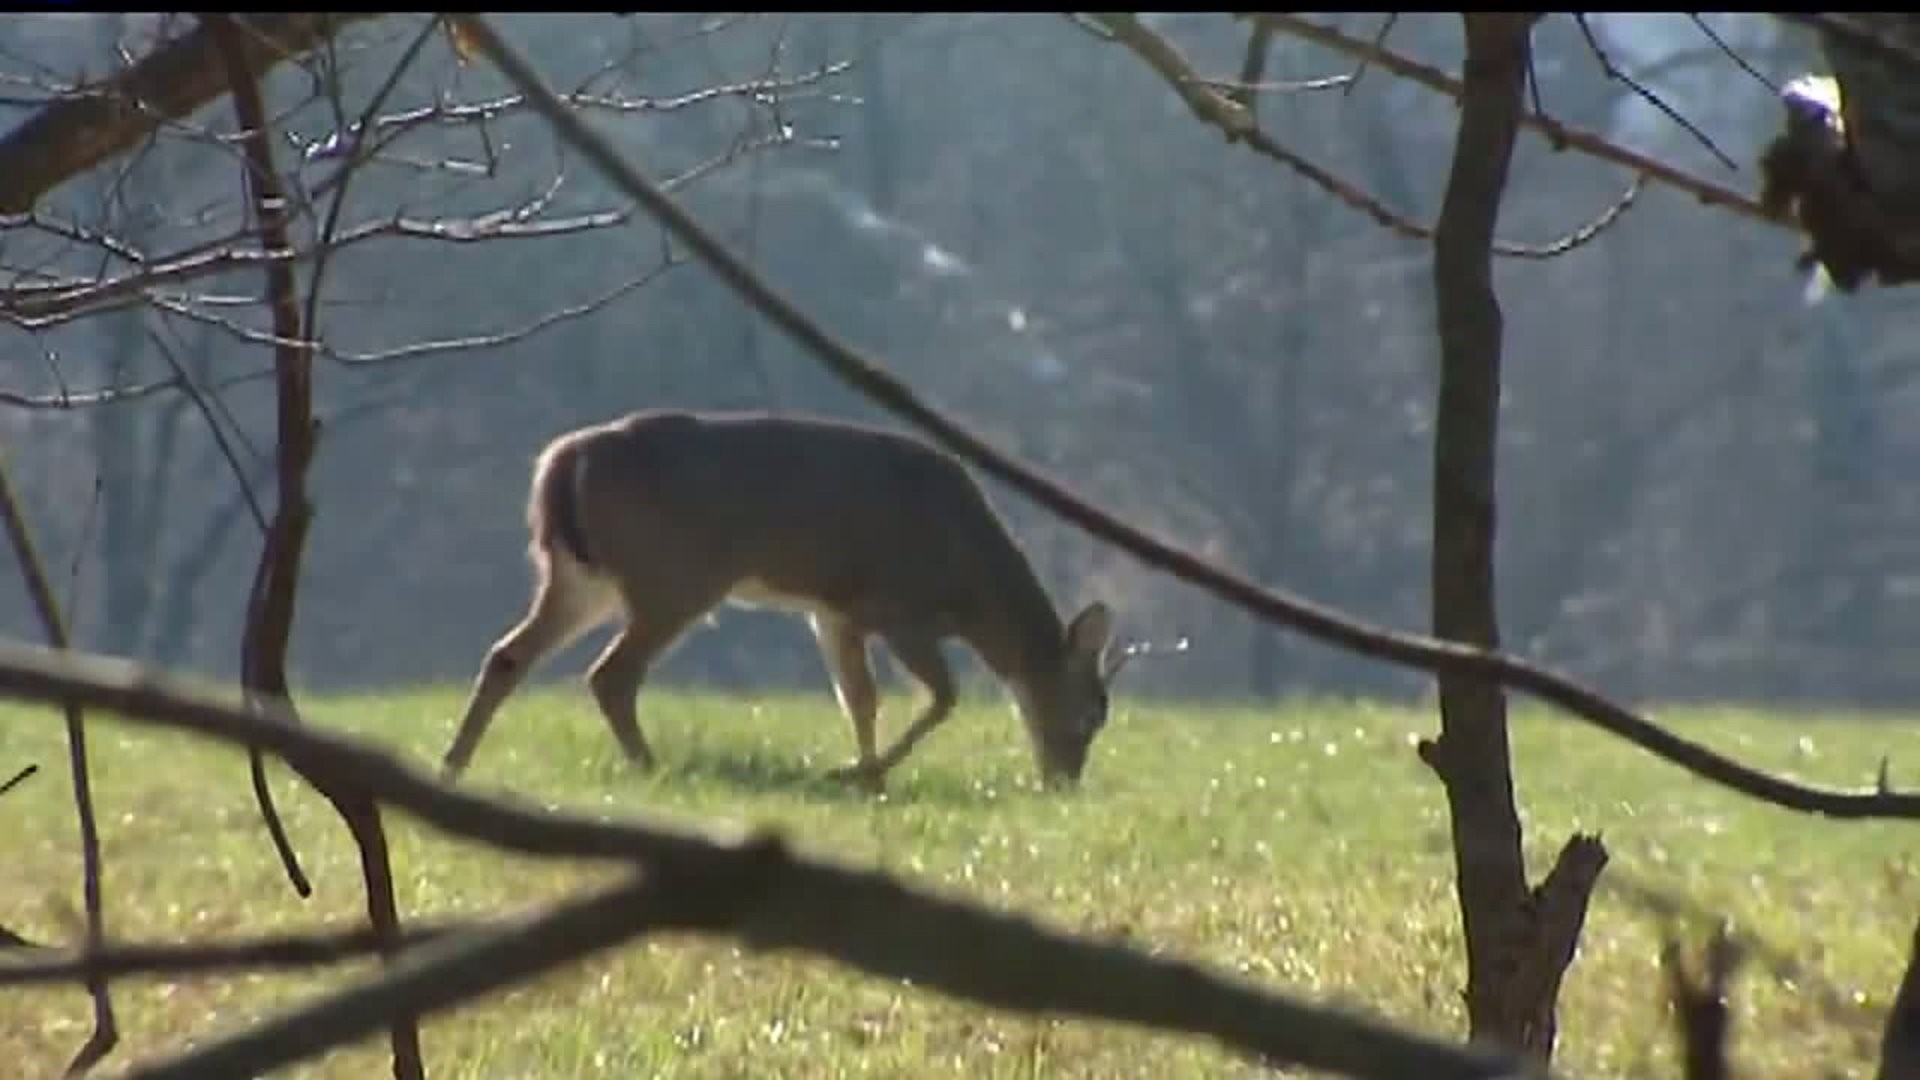 The Pa. Game Commission is notifying hunters about two viruses affecting deer populations, Epizootic Hemorrhagic Disease and Bluetongue Virus.